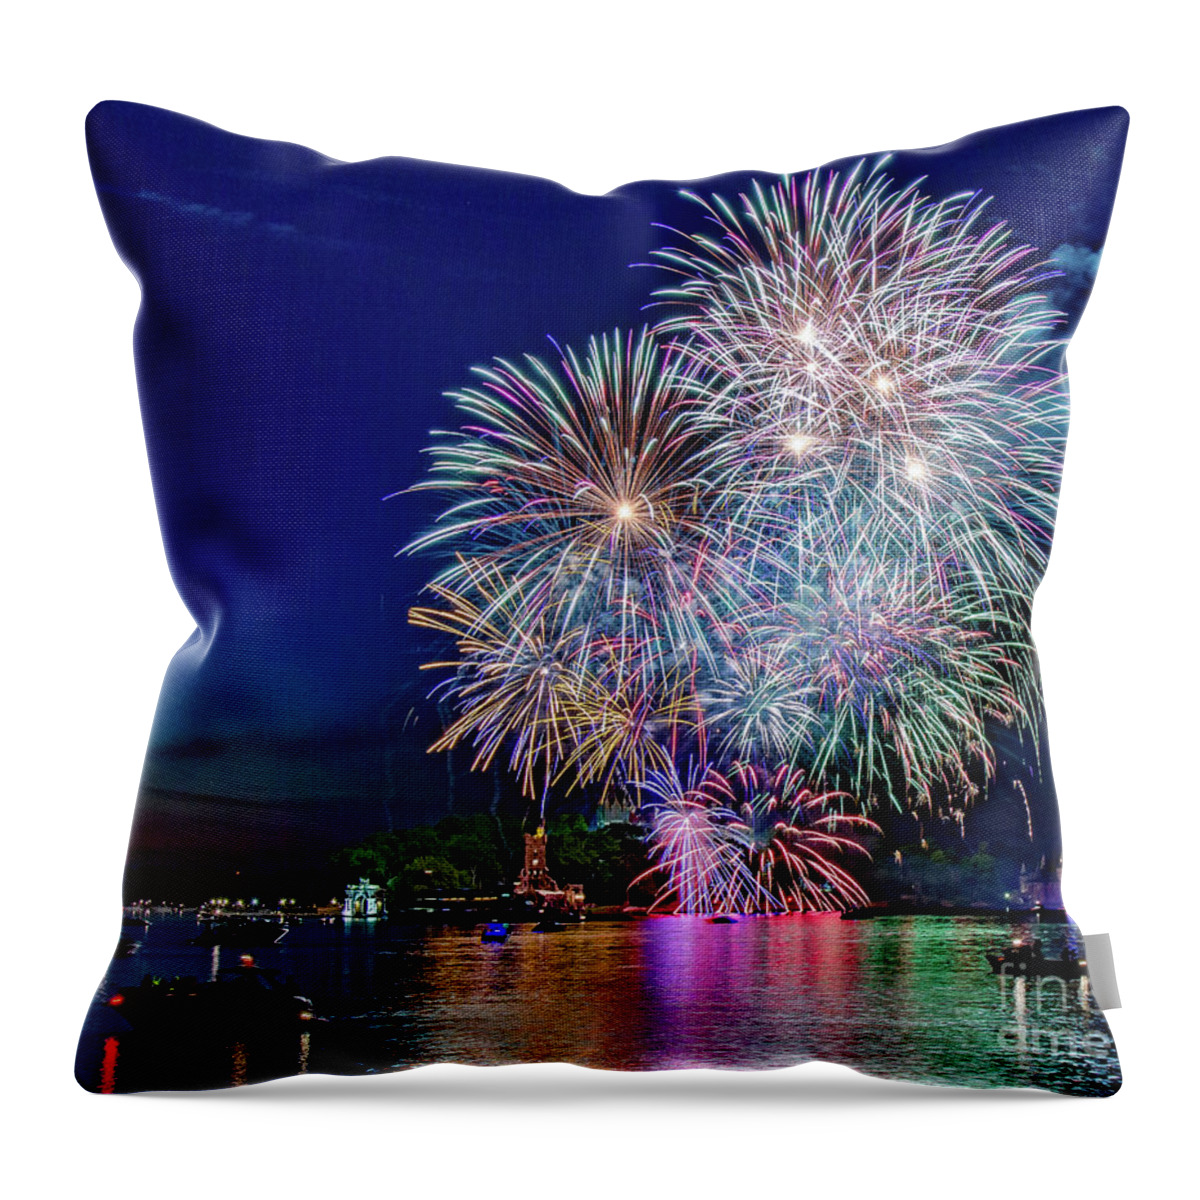 Fireworks Throw Pillow featuring the photograph Fireworks Spectacular by Rod Best